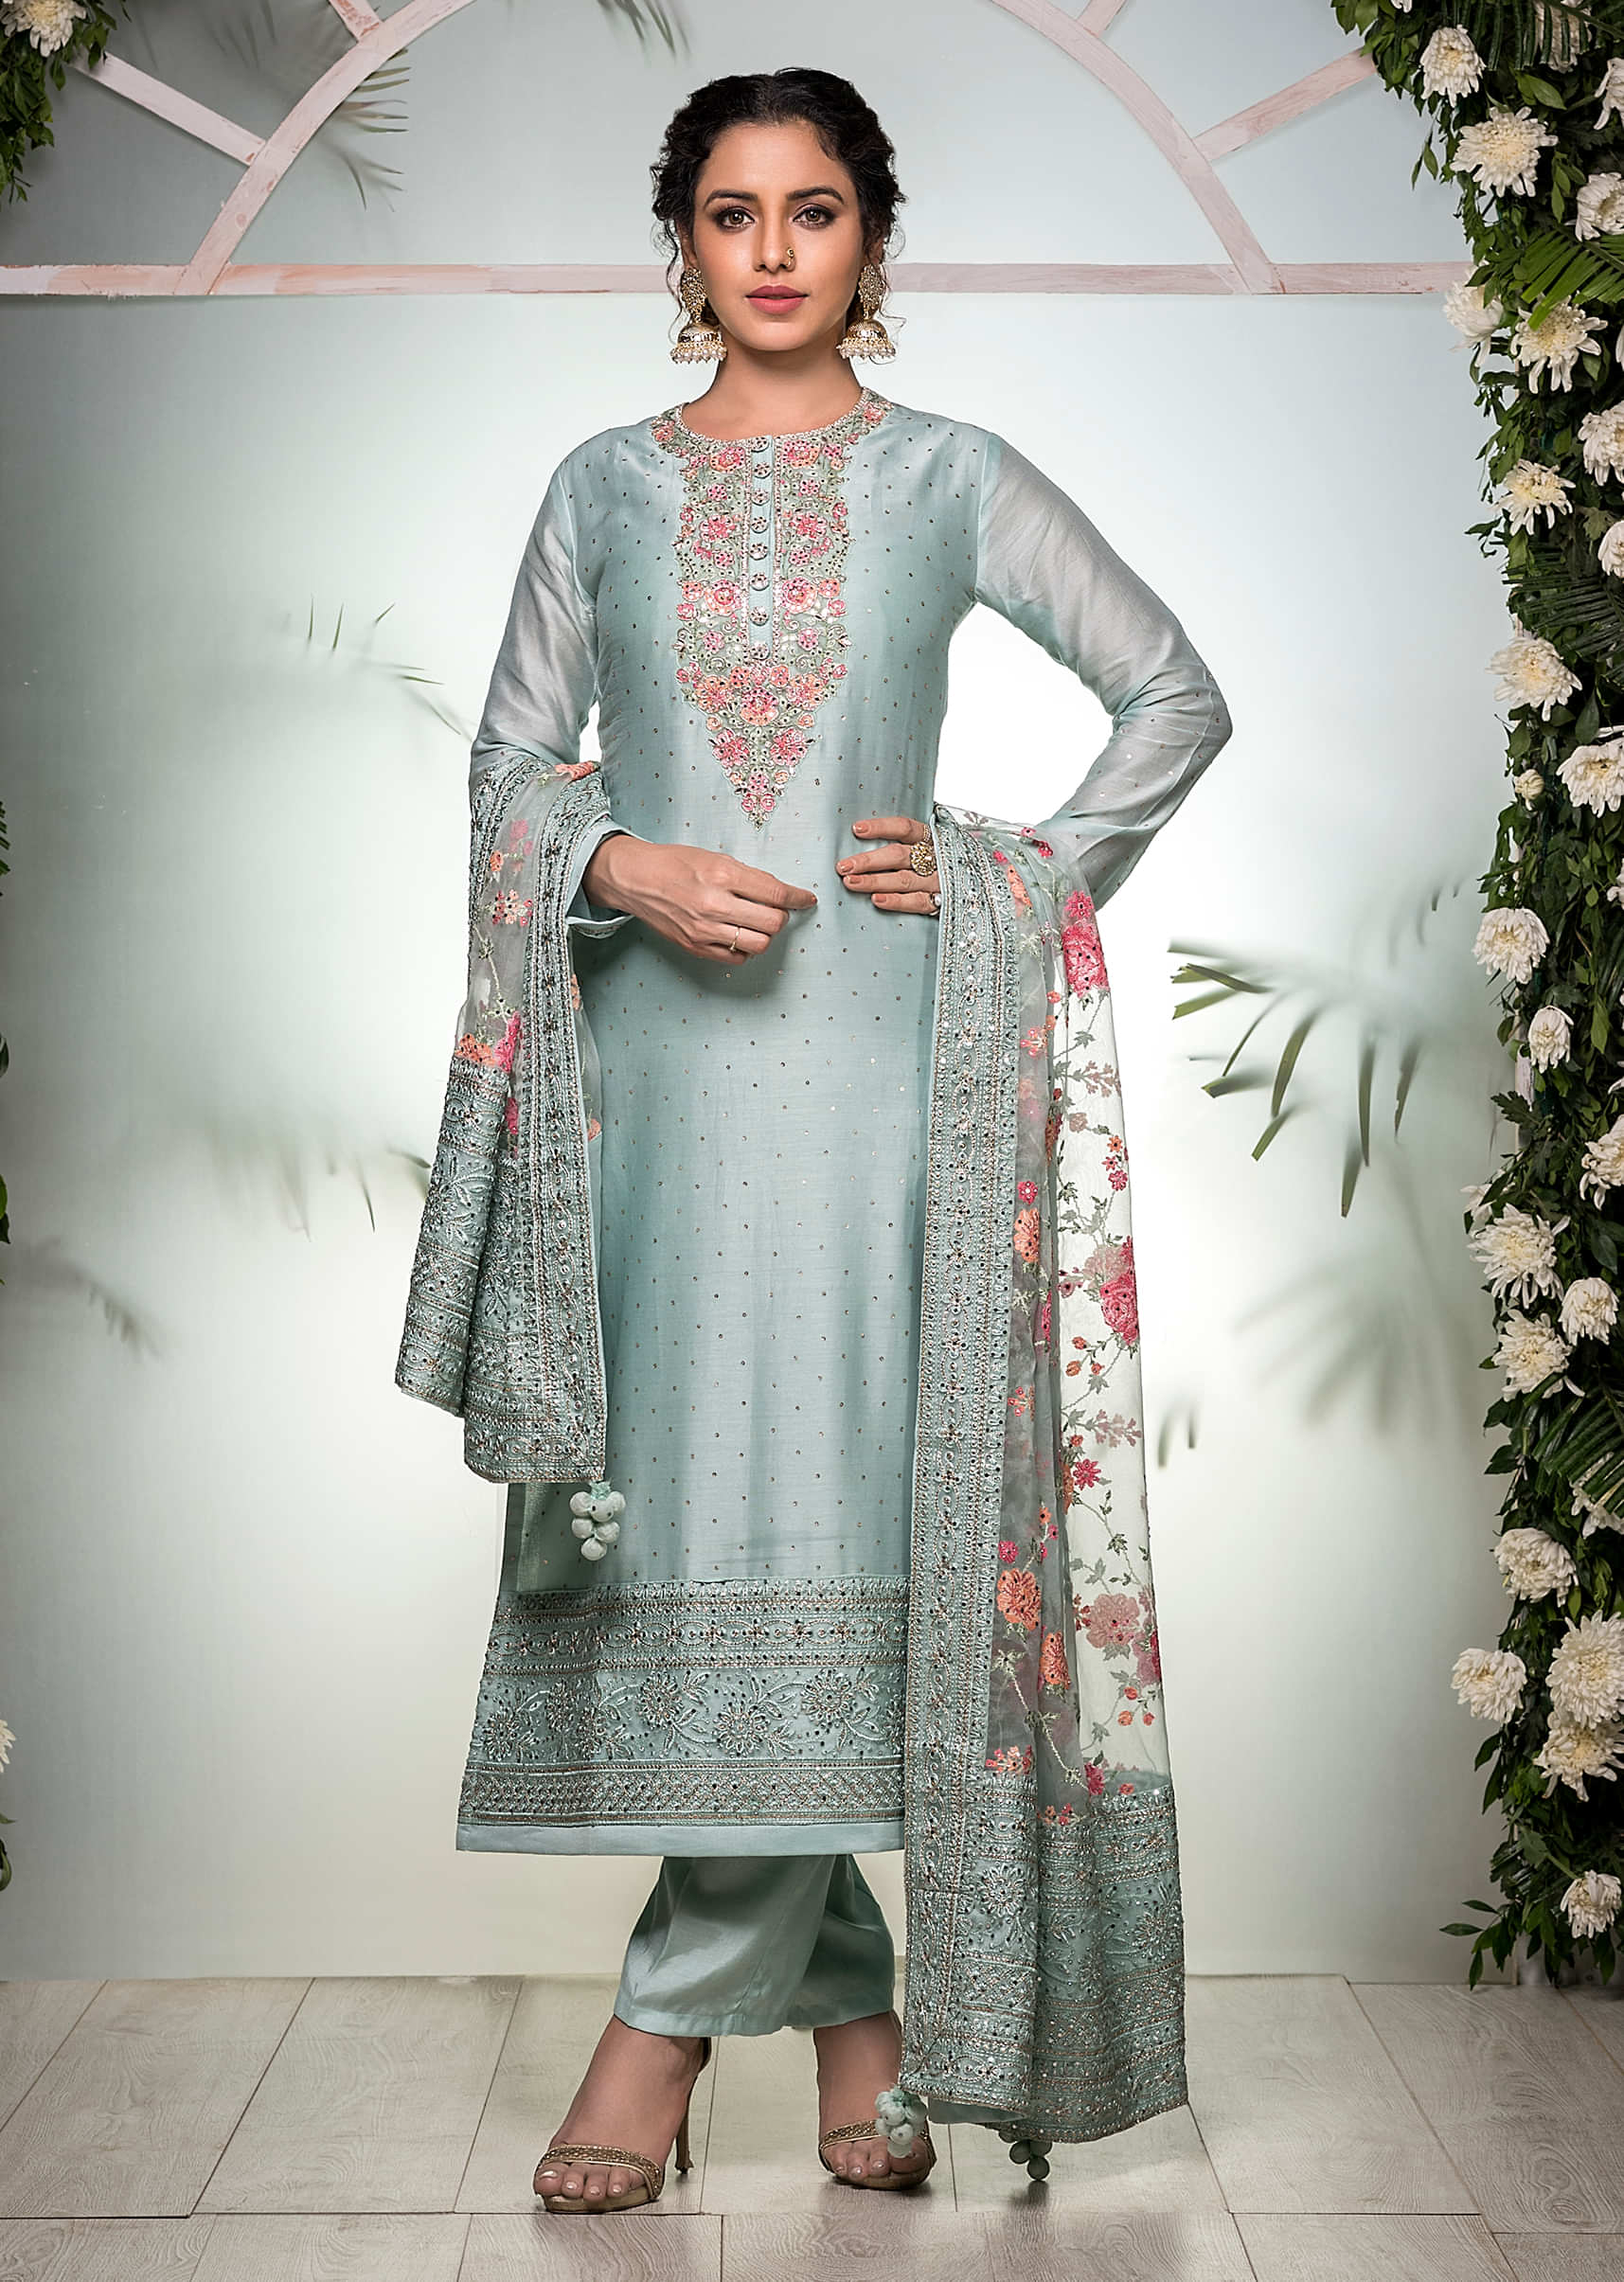 Pastel Green Straight Cut Suit With Multi Colored Thread Embroidered Floral Motifs On The Yoke And Organza Dupatta  